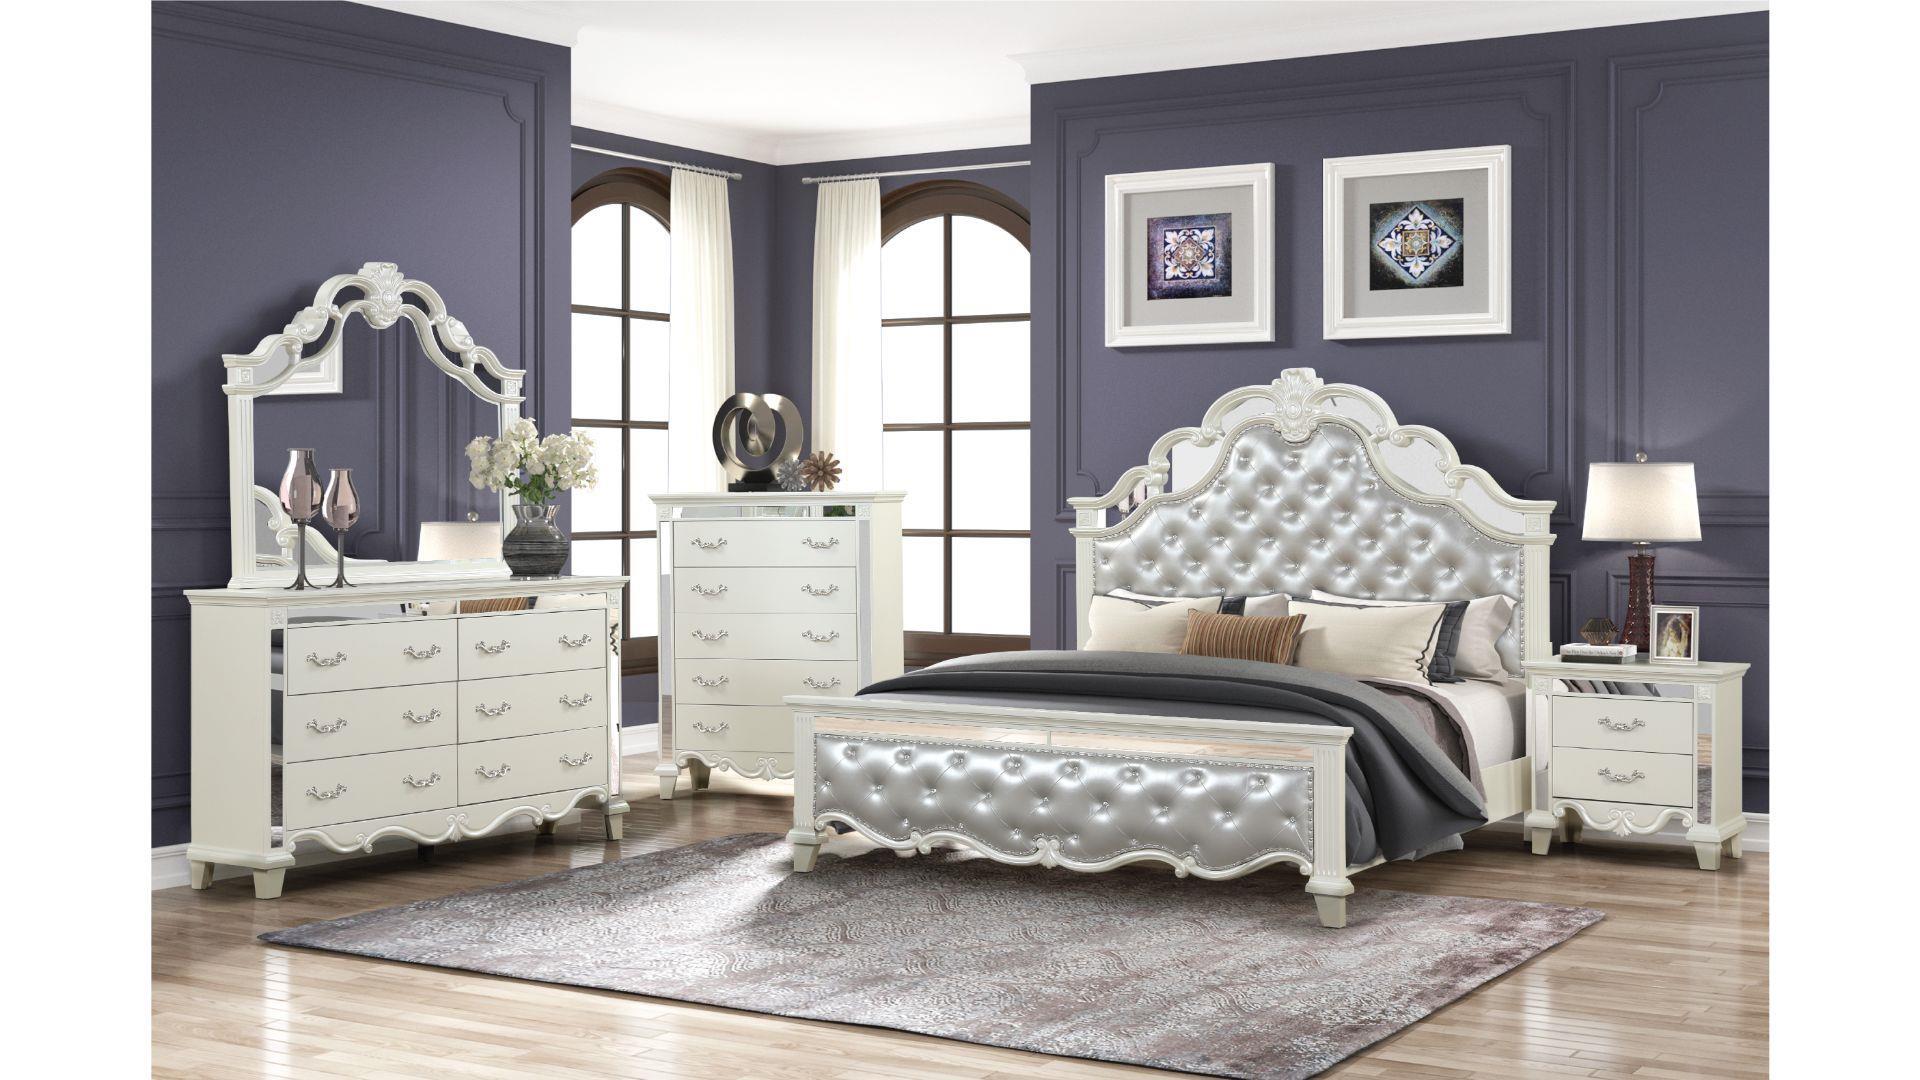 

    
Milky White Tufted Queen Bedroom Set 4Pcs MILAN Galaxy Home Contemporary Modern
